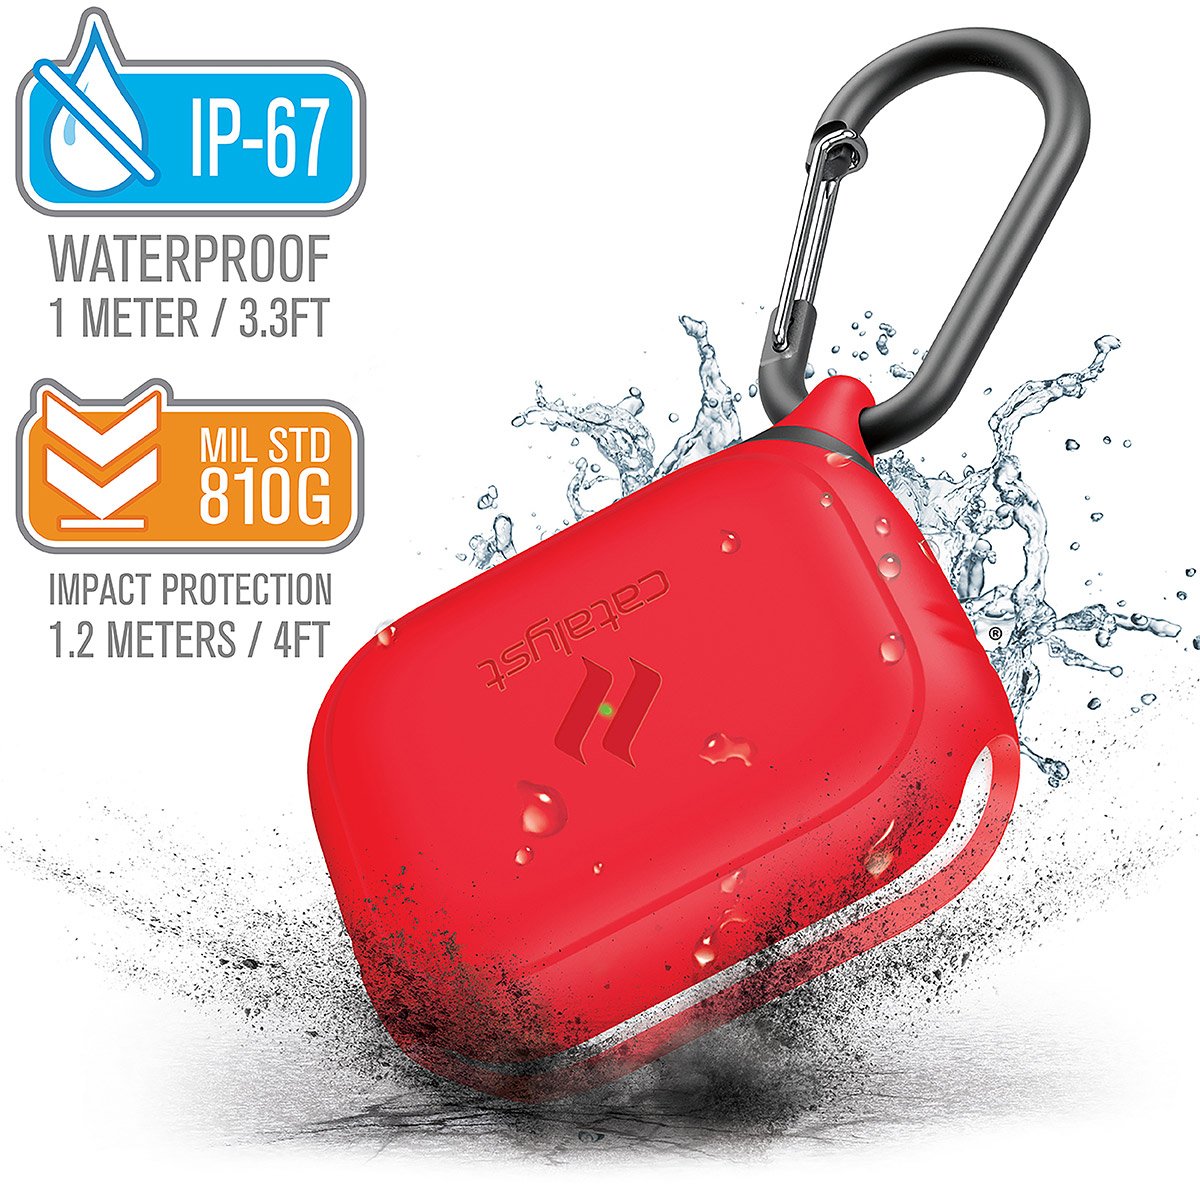 CATAPDPRORED | catalyst airpods pro gen 2 1 waterproof case carabiner flame red with cracked floor and splashes of water text reads ip-67 waterproof 1 meter 3.3ft mil std 810g impact protection 1.2 meters 4ft